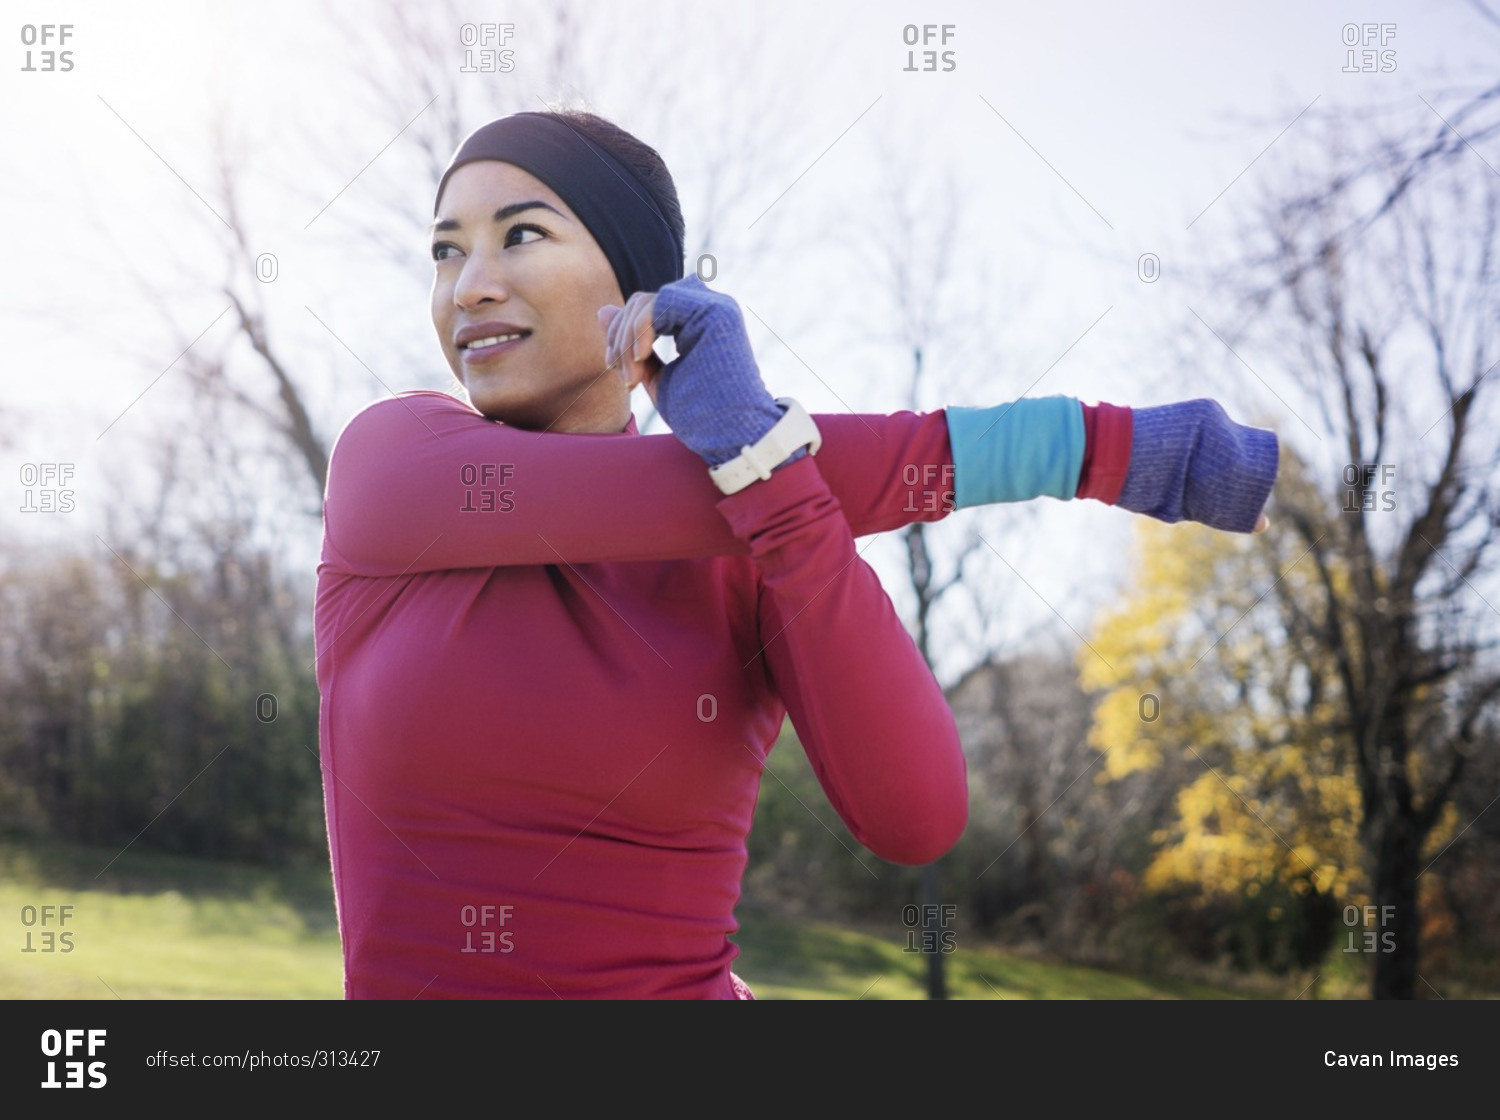 Woman stretching arms before outdoor workout